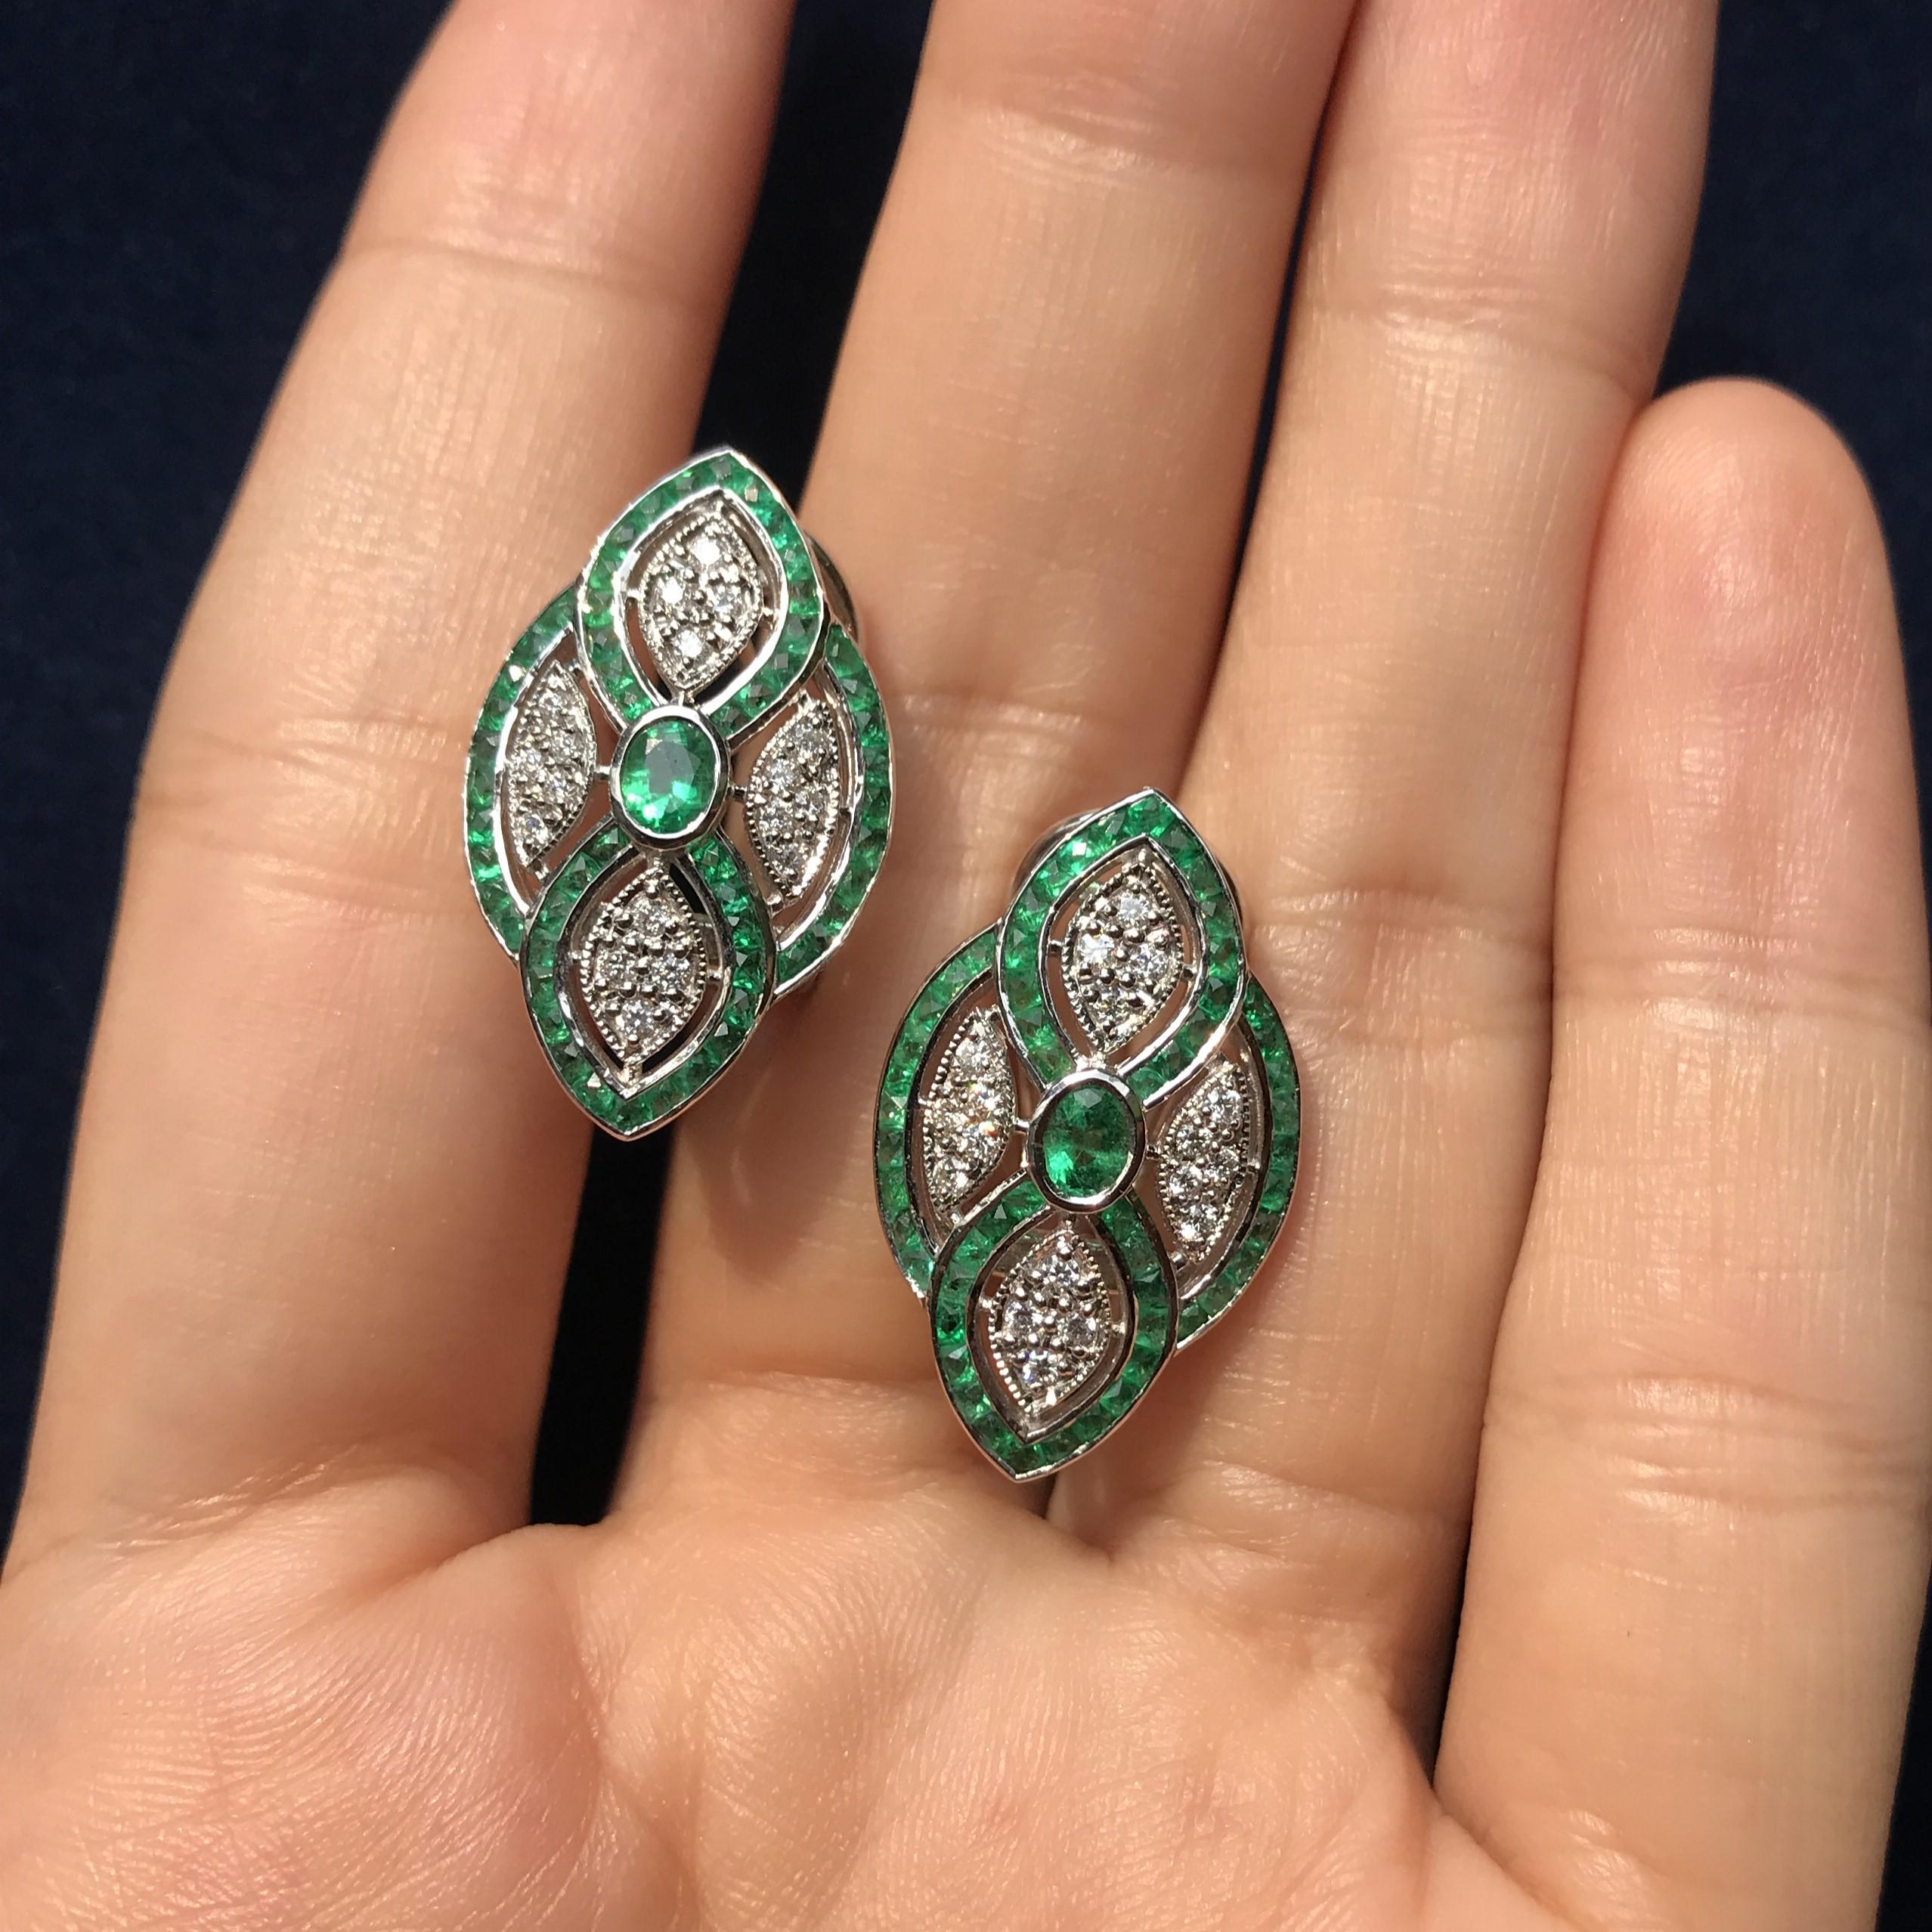 The pop of the bright green emeralds and diamonds next to the bright 18K white gold is absolutely stunning. The emeralds total 108 pieces and there are 36 diamonds points.

Information
Metal: 18K White Gold
Width: 15 mm.
Length: 25 mm.
Weight: 9.40